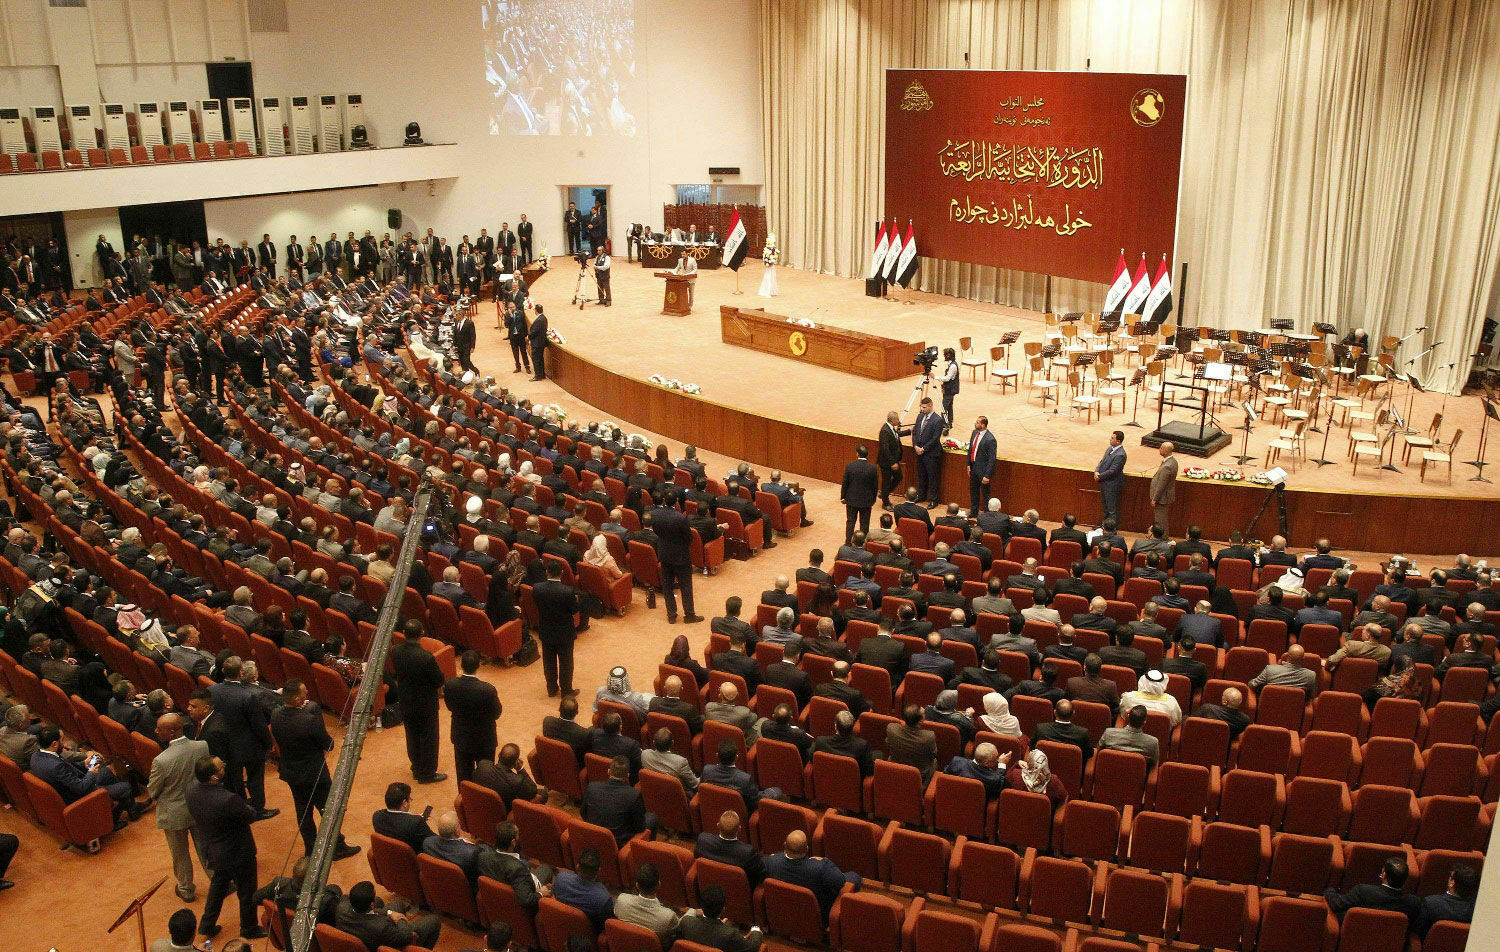 Crisis with a "plus" sign: what has changed in Iraq since the fall of Saddam Hussein's regime